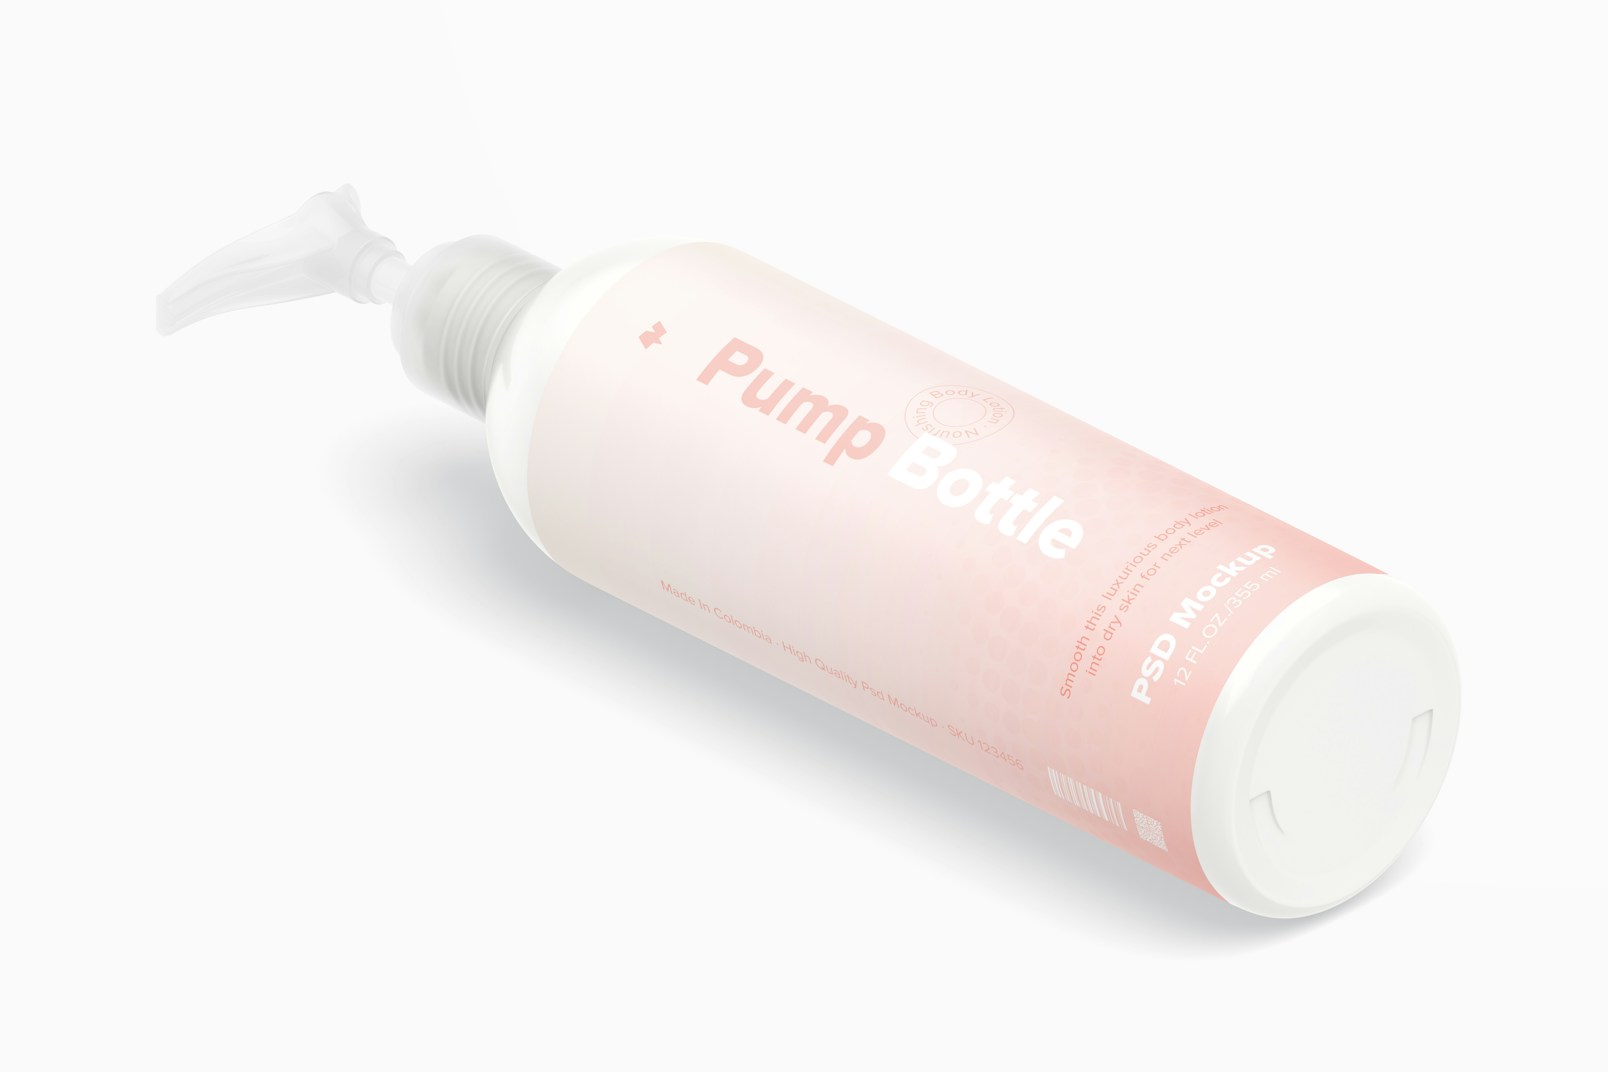 12 oz Pump Rounded Bottle Mockup, Isometric Right View